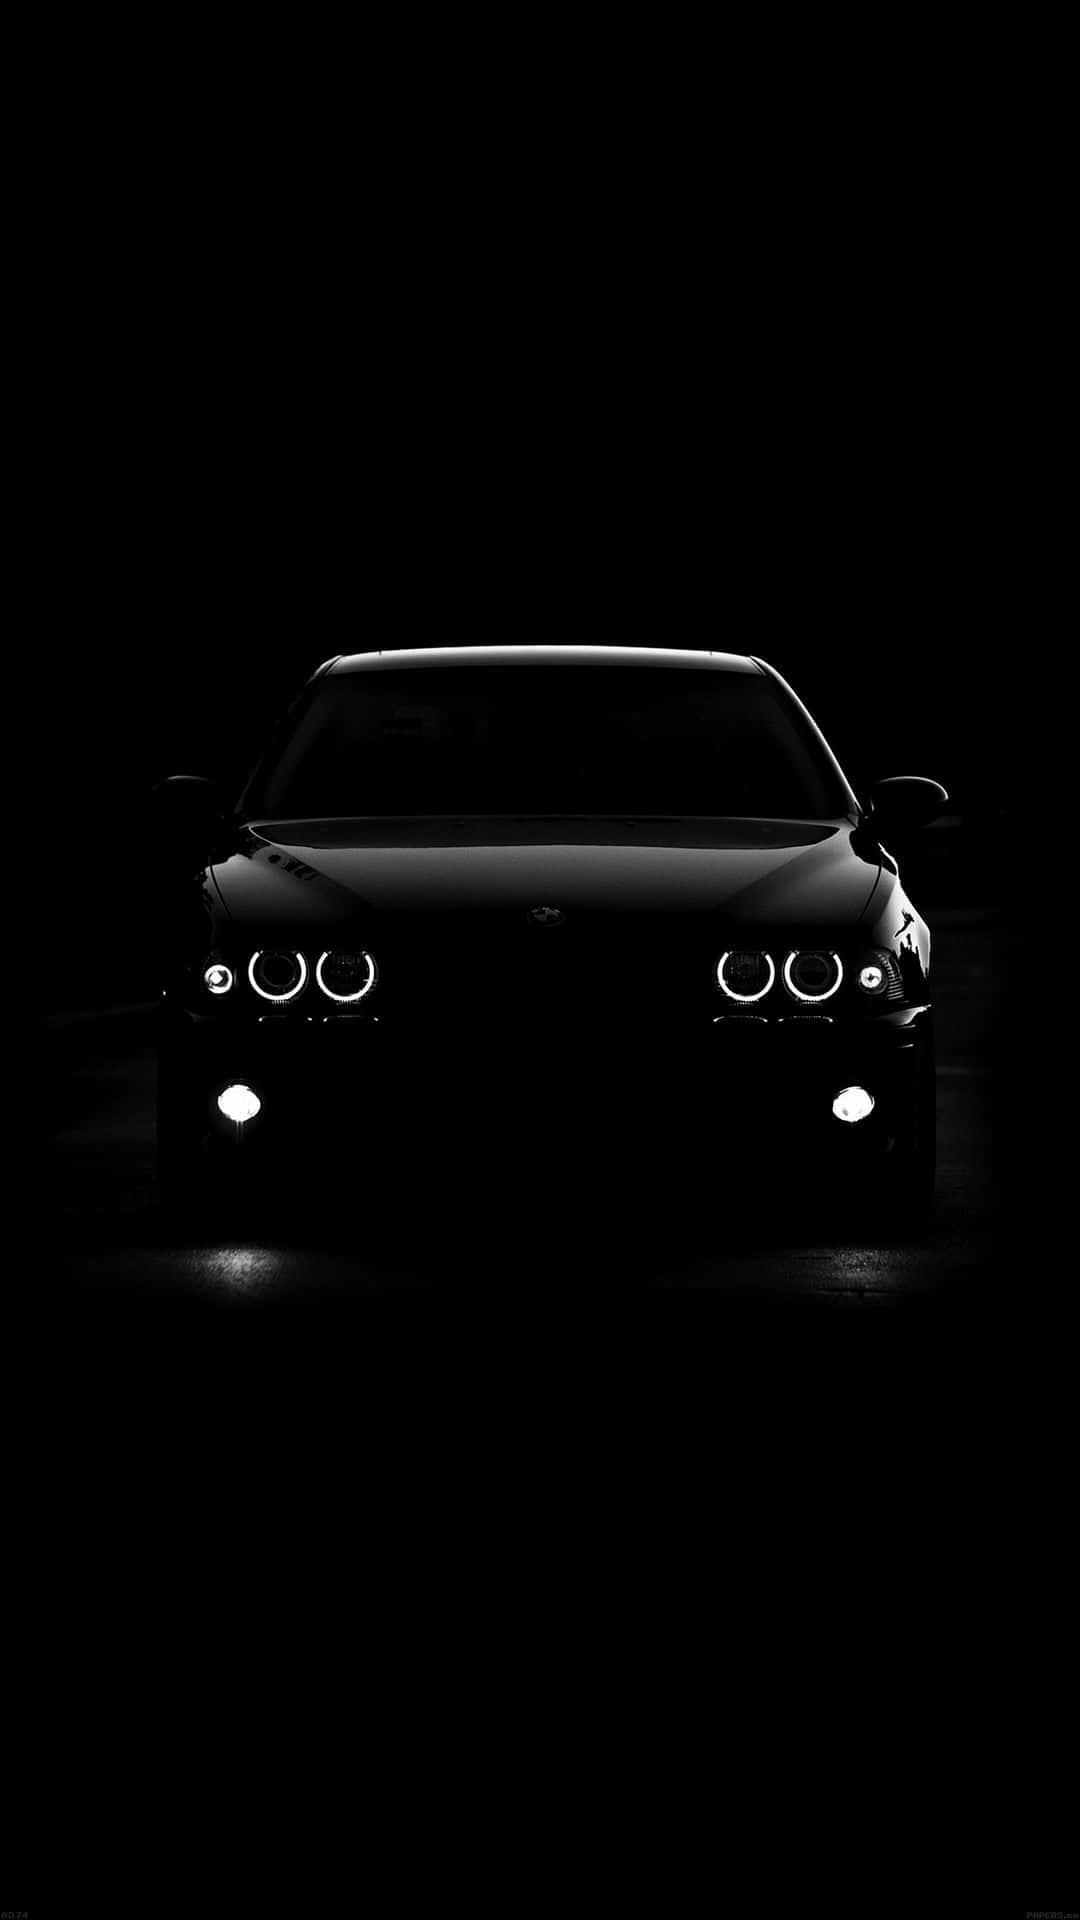 Download Stylish Black and White Car Wallpaper | Wallpapers.com